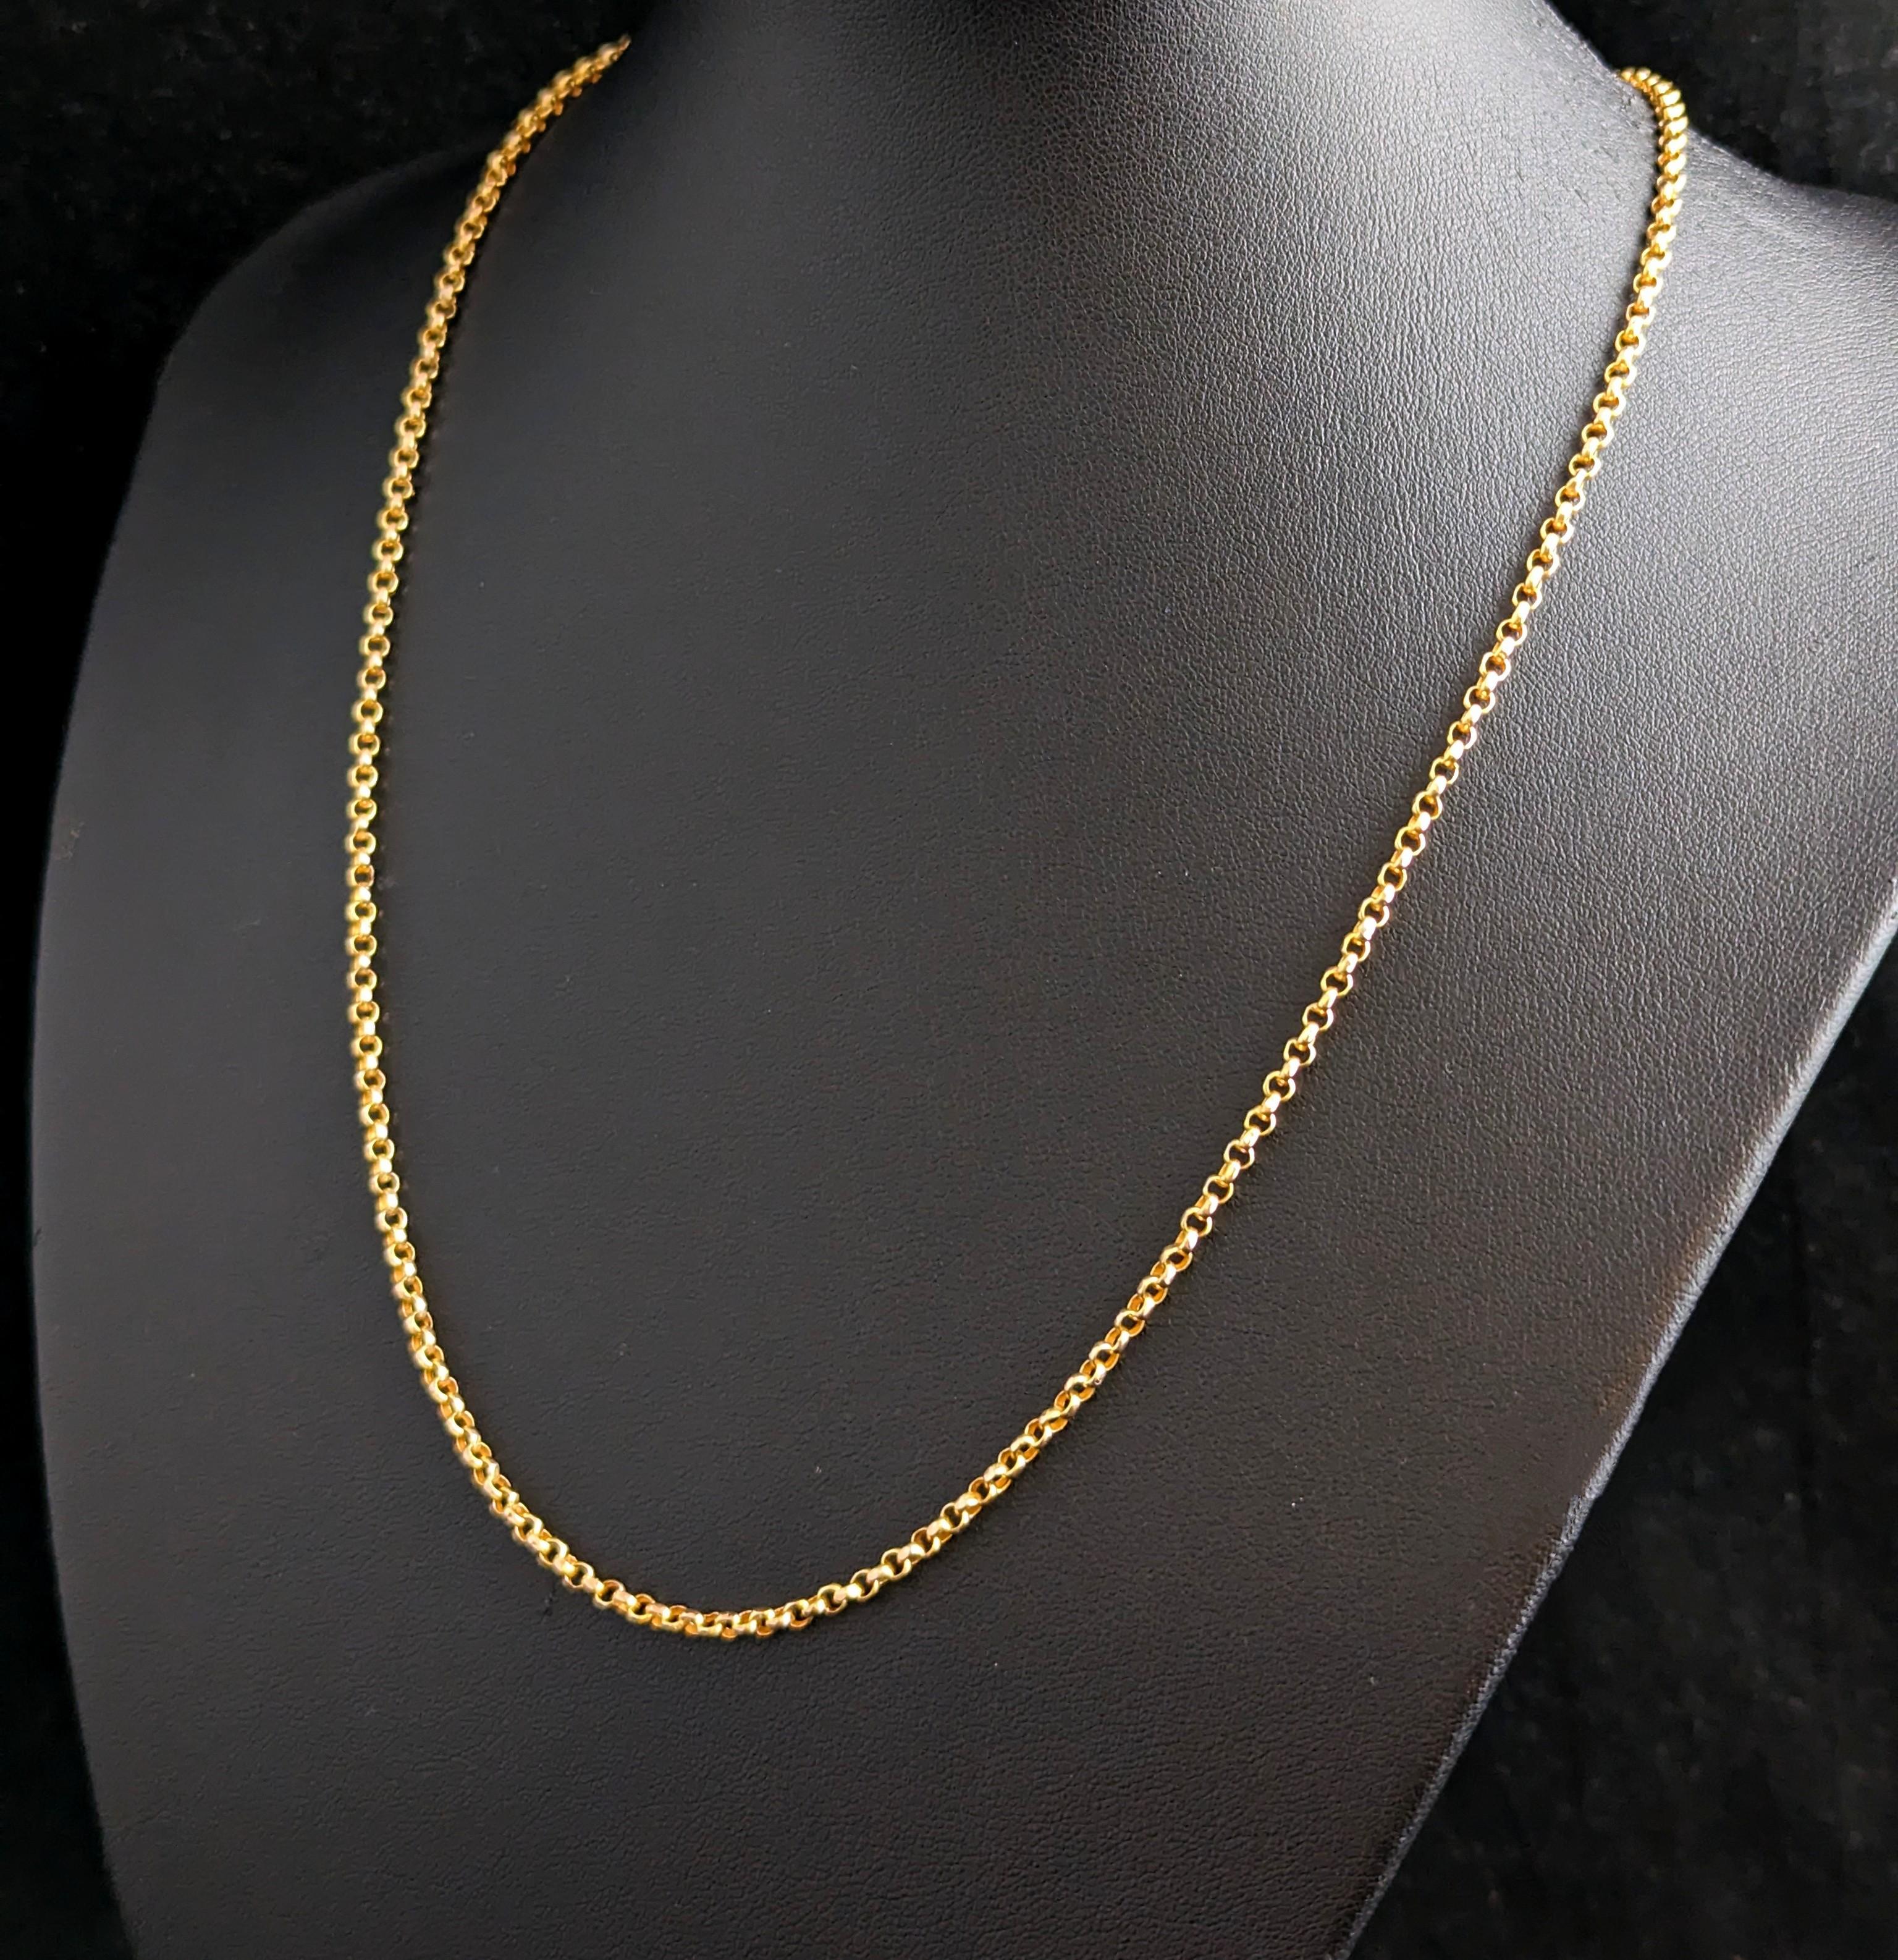 Antique 9k yellow gold Belcher link chain necklace, Edwardian  For Sale 2